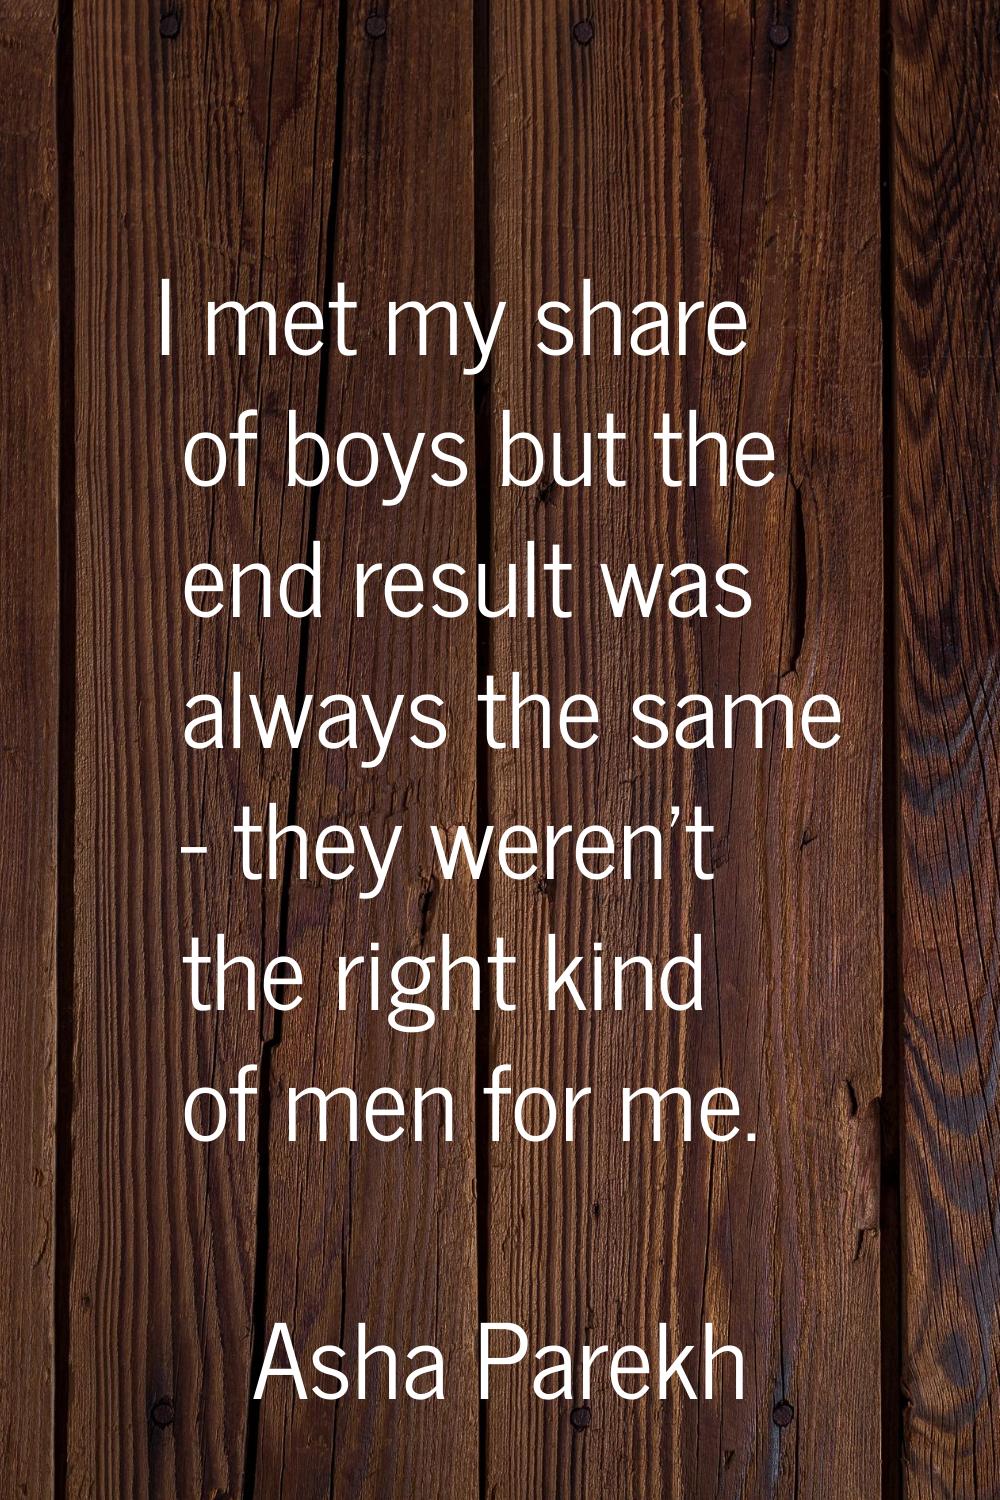 I met my share of boys but the end result was always the same - they weren't the right kind of men 